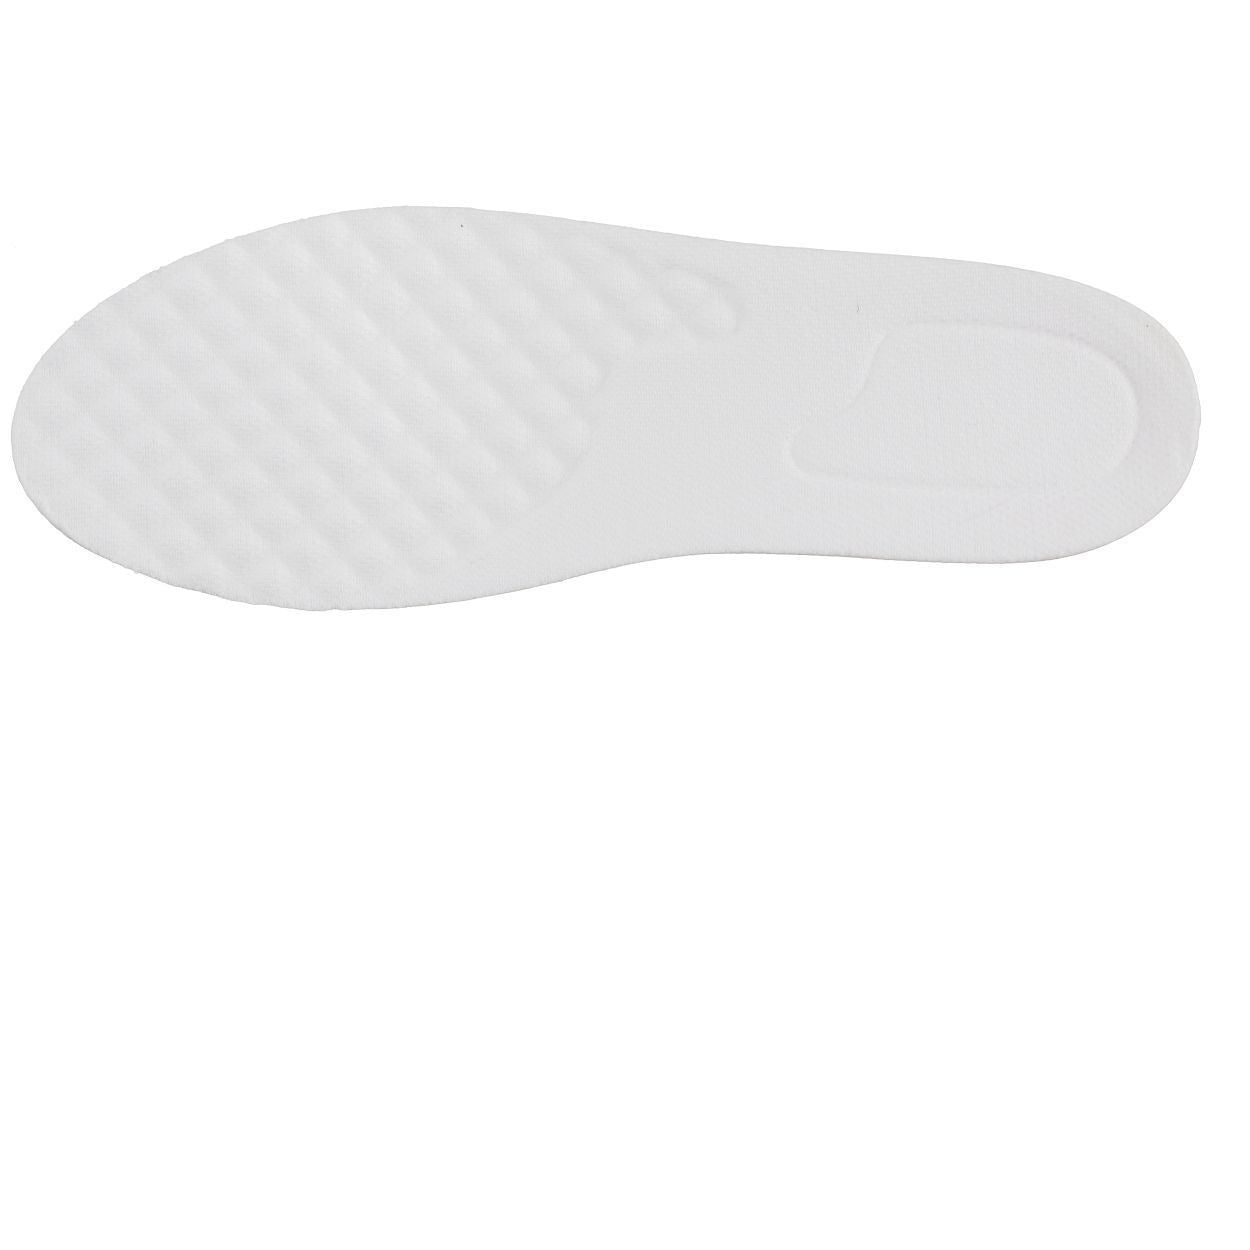 Elevator shoes height increase Adjustable Elevator Insoles - 1.5 to 2.0 Inch - IK109